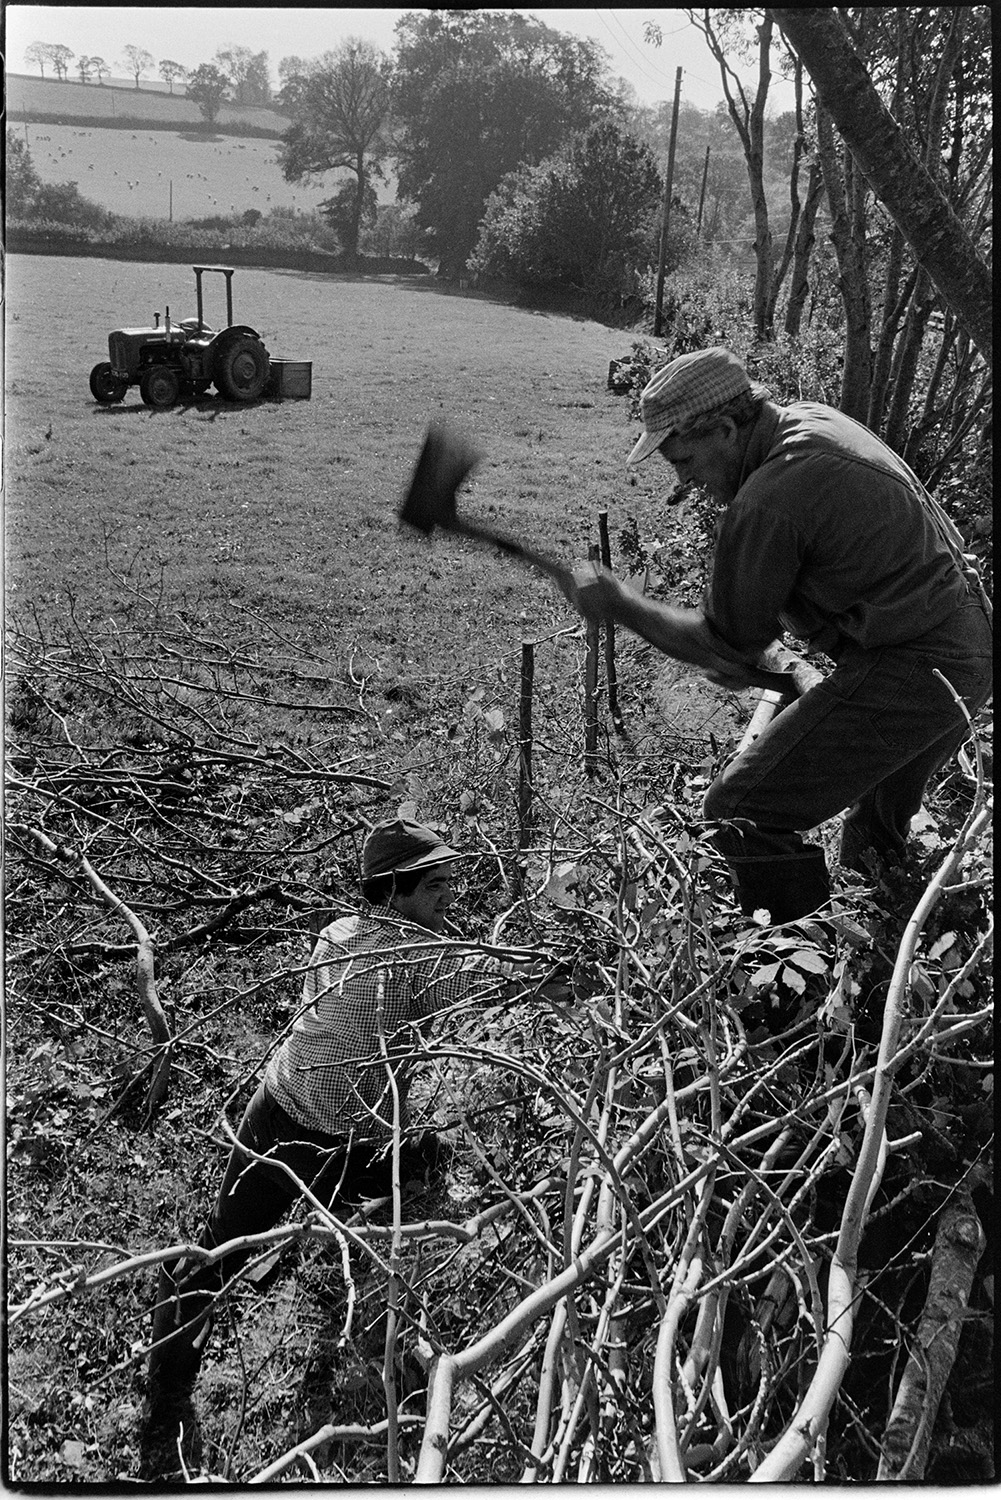 Alf Pugsley and Stephen Squire laying a hedge at Lower Langham, Dolton. Alf Pugsley is knocking in a wooden cruck with an axe, while Stephen squire holds the branches in place. A tractor and link box can be seen in the field in the background.